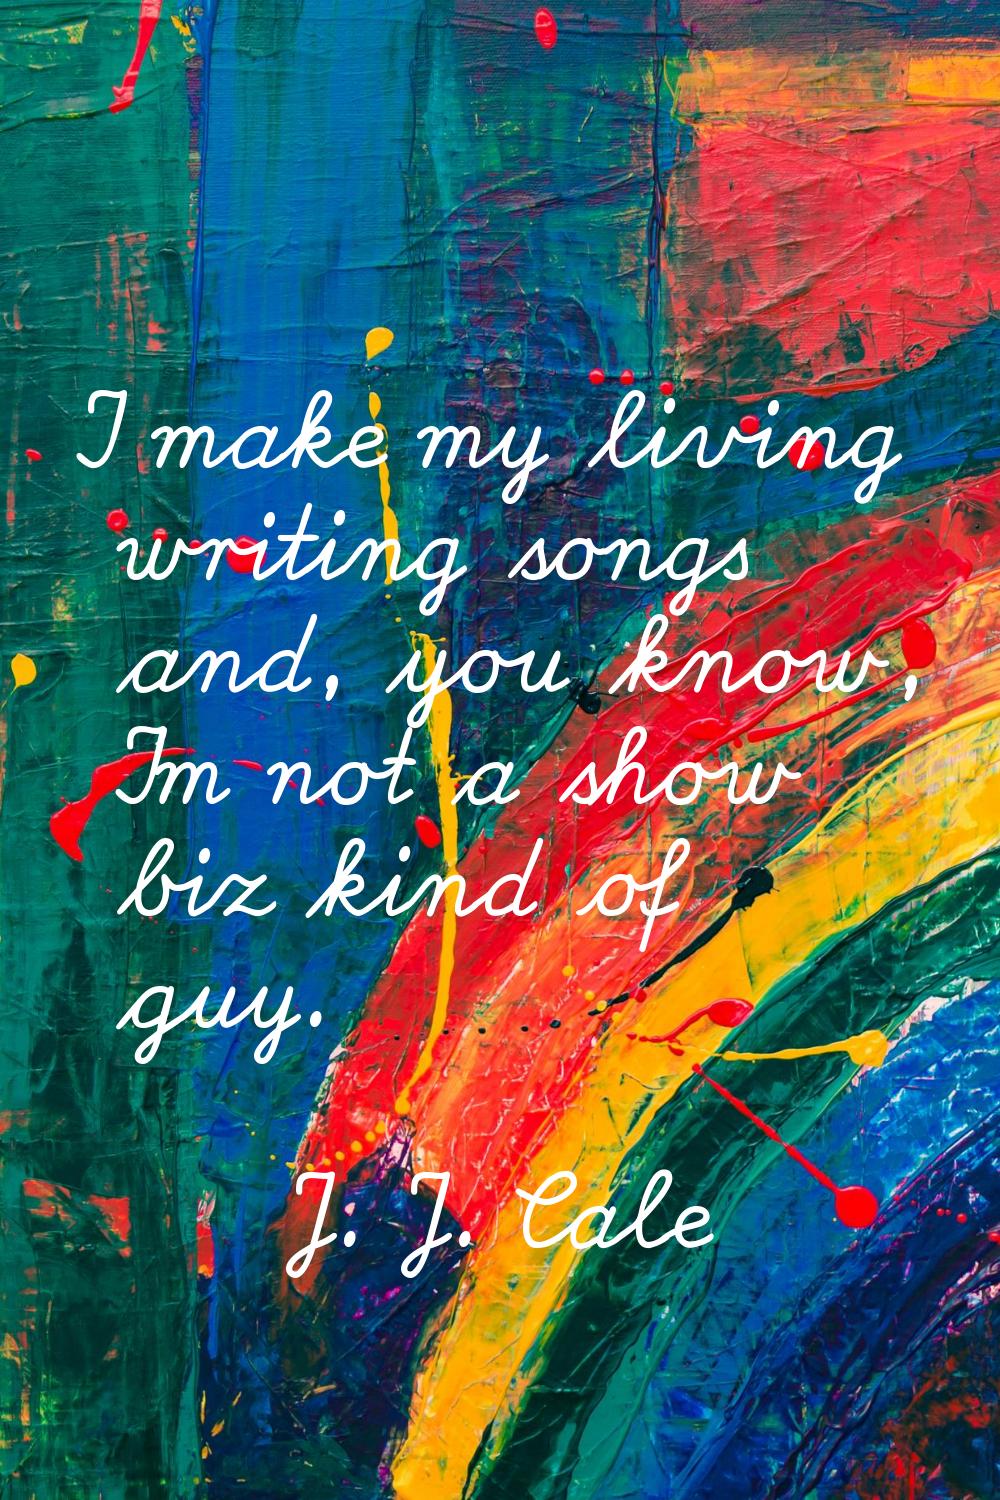 I make my living writing songs and, you know, I'm not a show biz kind of guy.